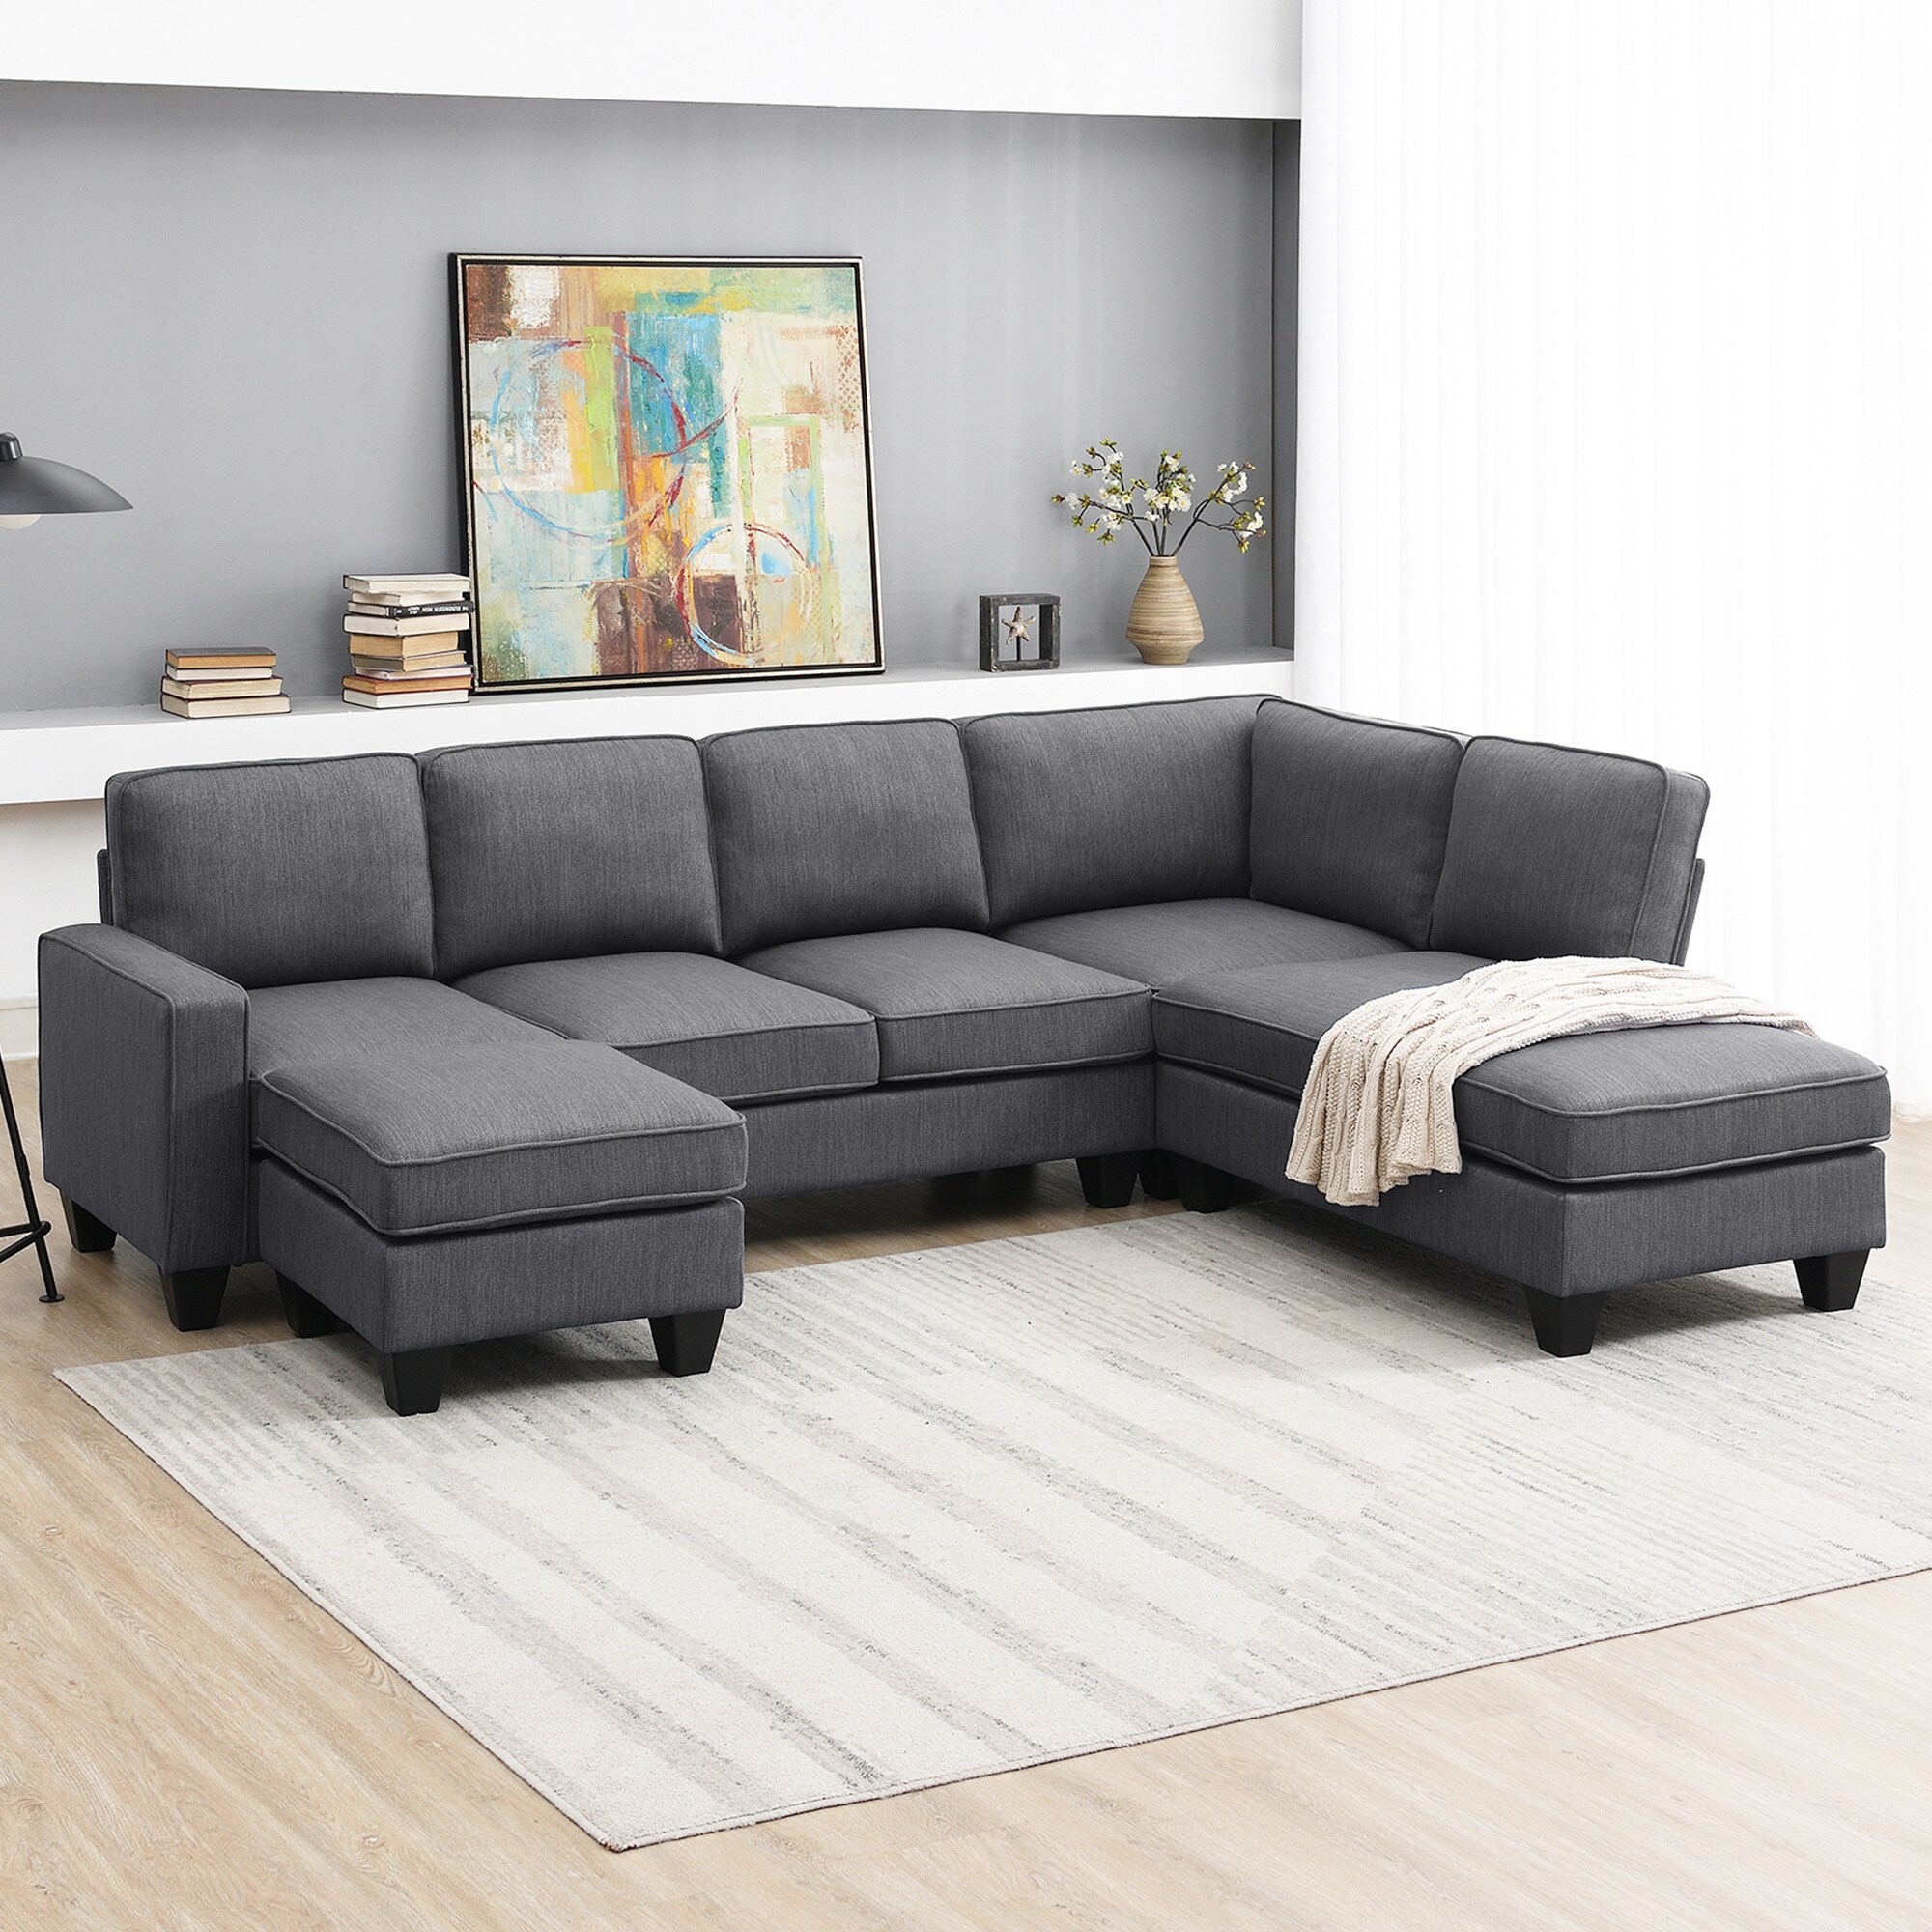 104 inch Upholstered 4-Seater Sofa Couch with 4 Pillows, Modern Linen Fabric Sofa with Armrest Pockets,Minimalist Style Couch for Living Room